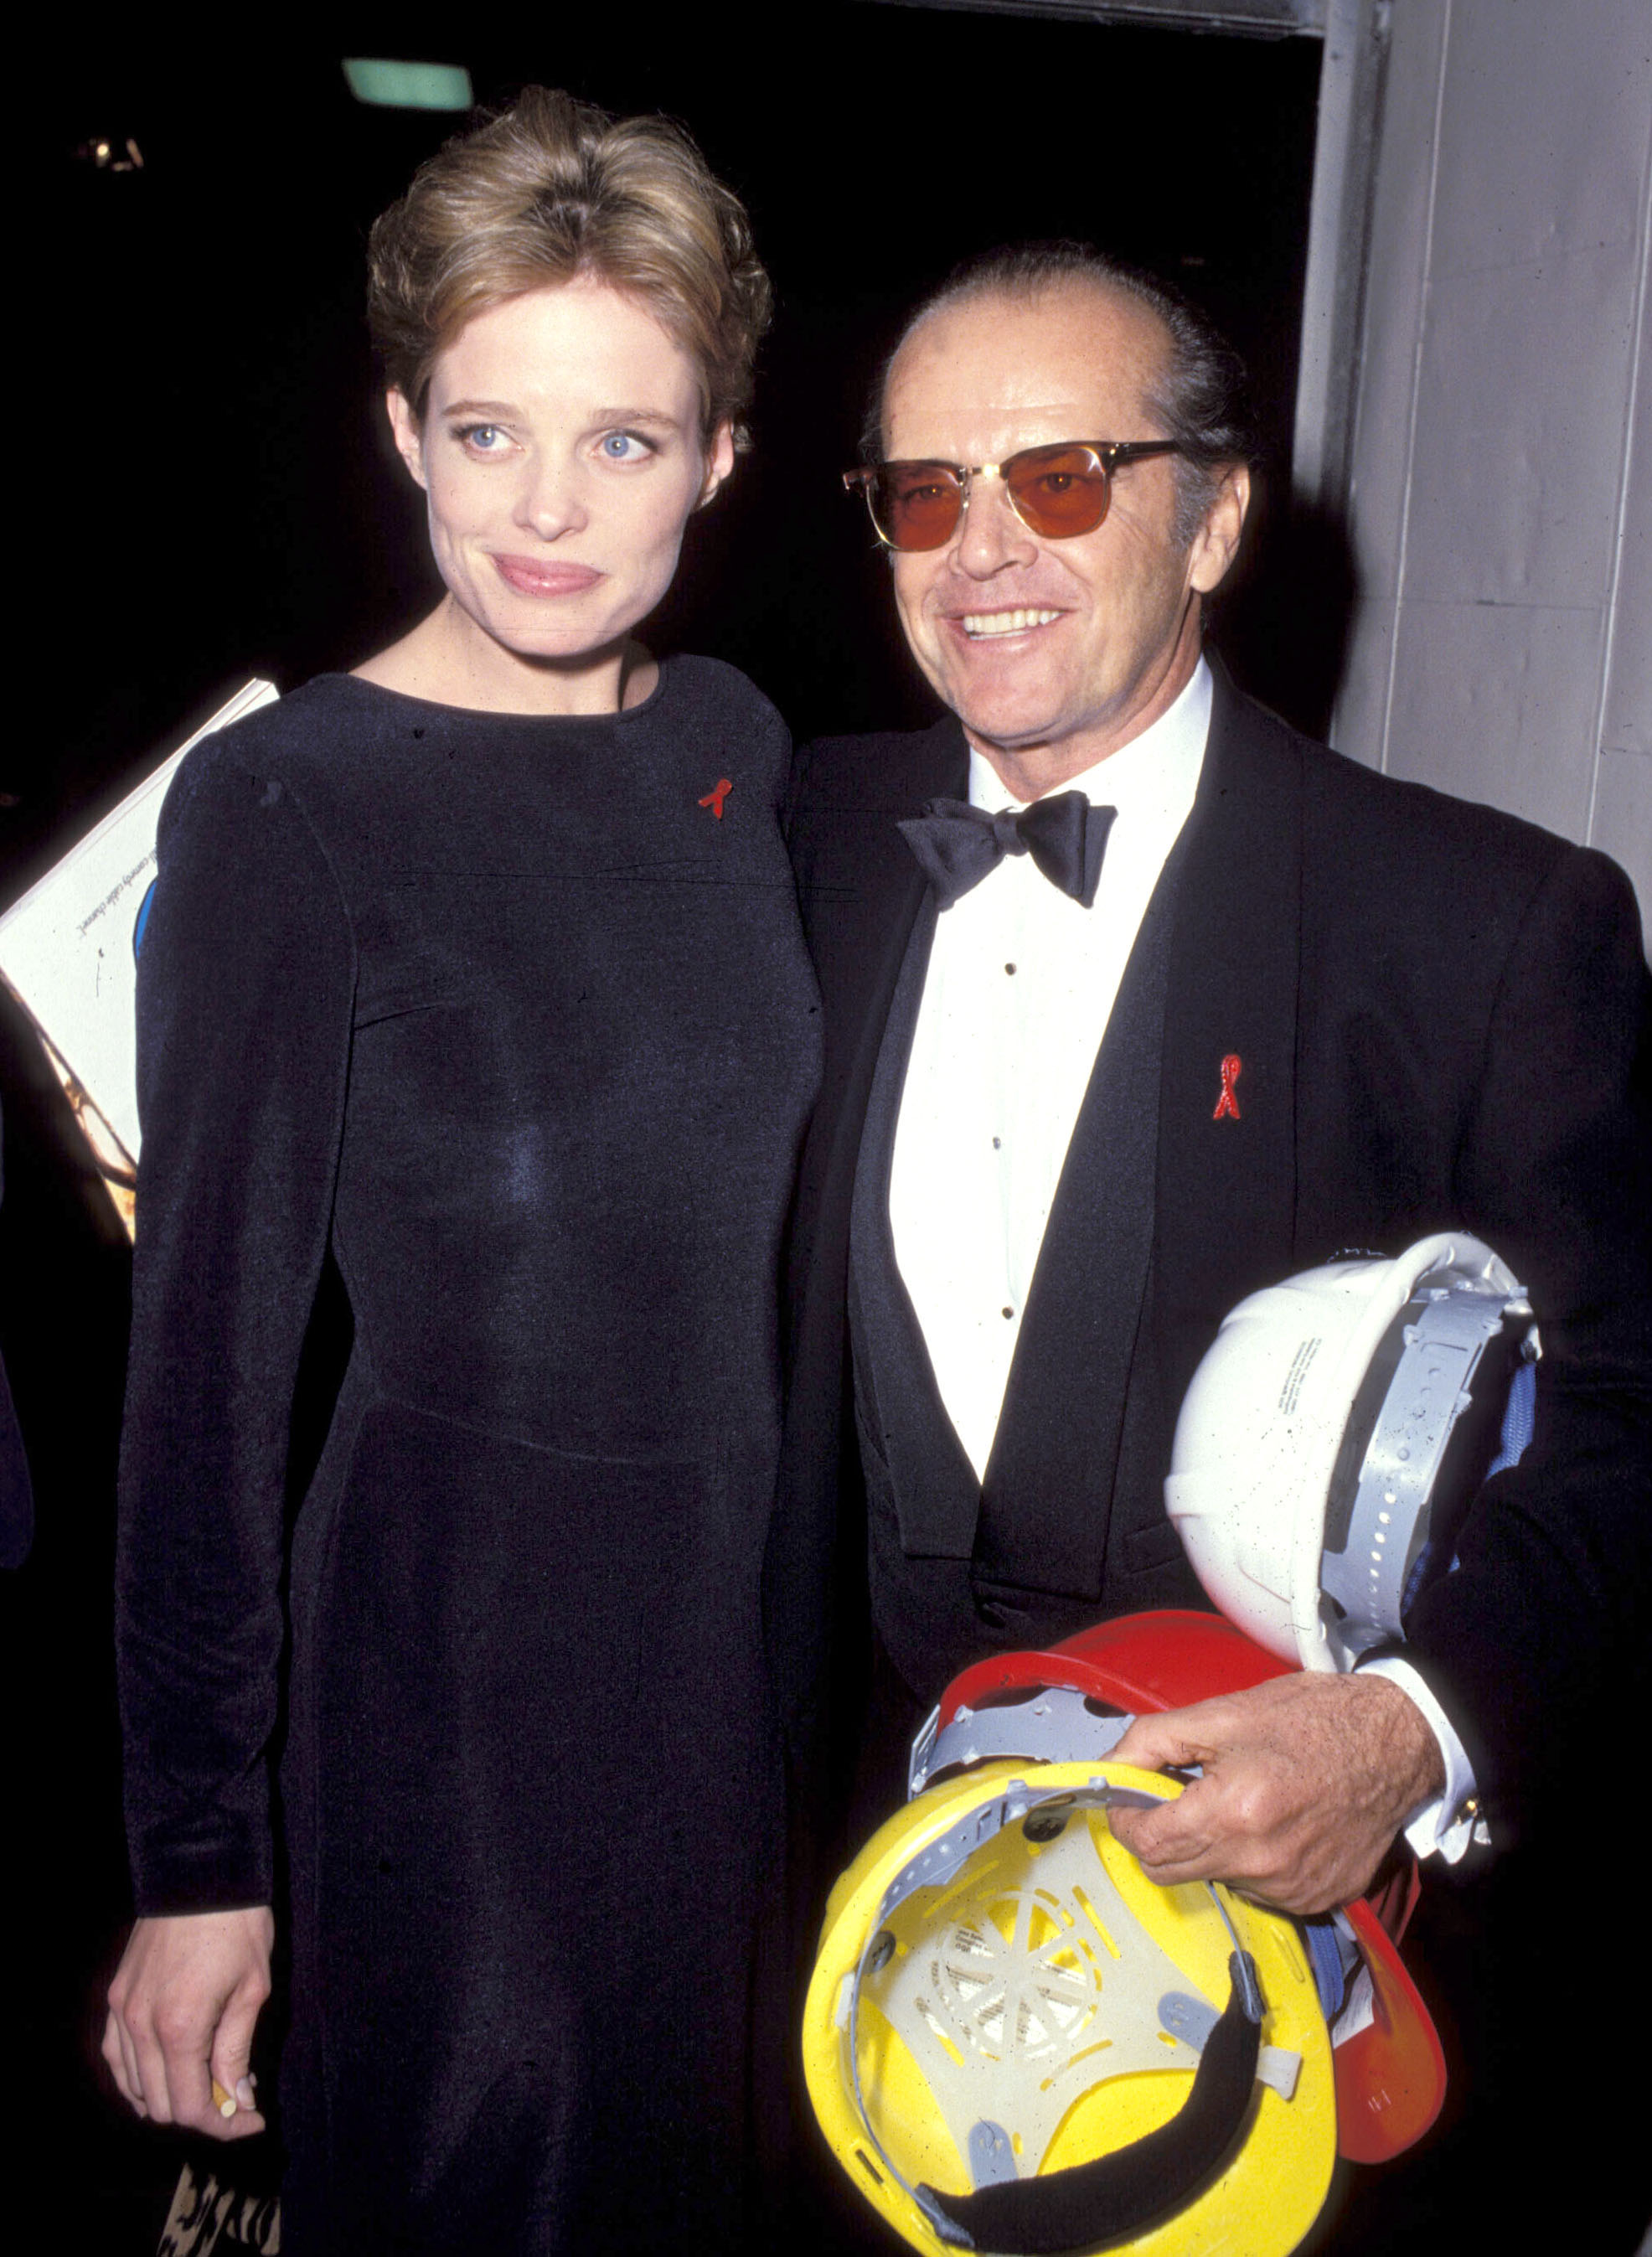 Jack Nicholson and Rebecca Broussard during the American Film Institute's event honoring Nicholson with a Life Achievement Award in Beverly Hills, California on March 3, 1994 | Source: Getty Images